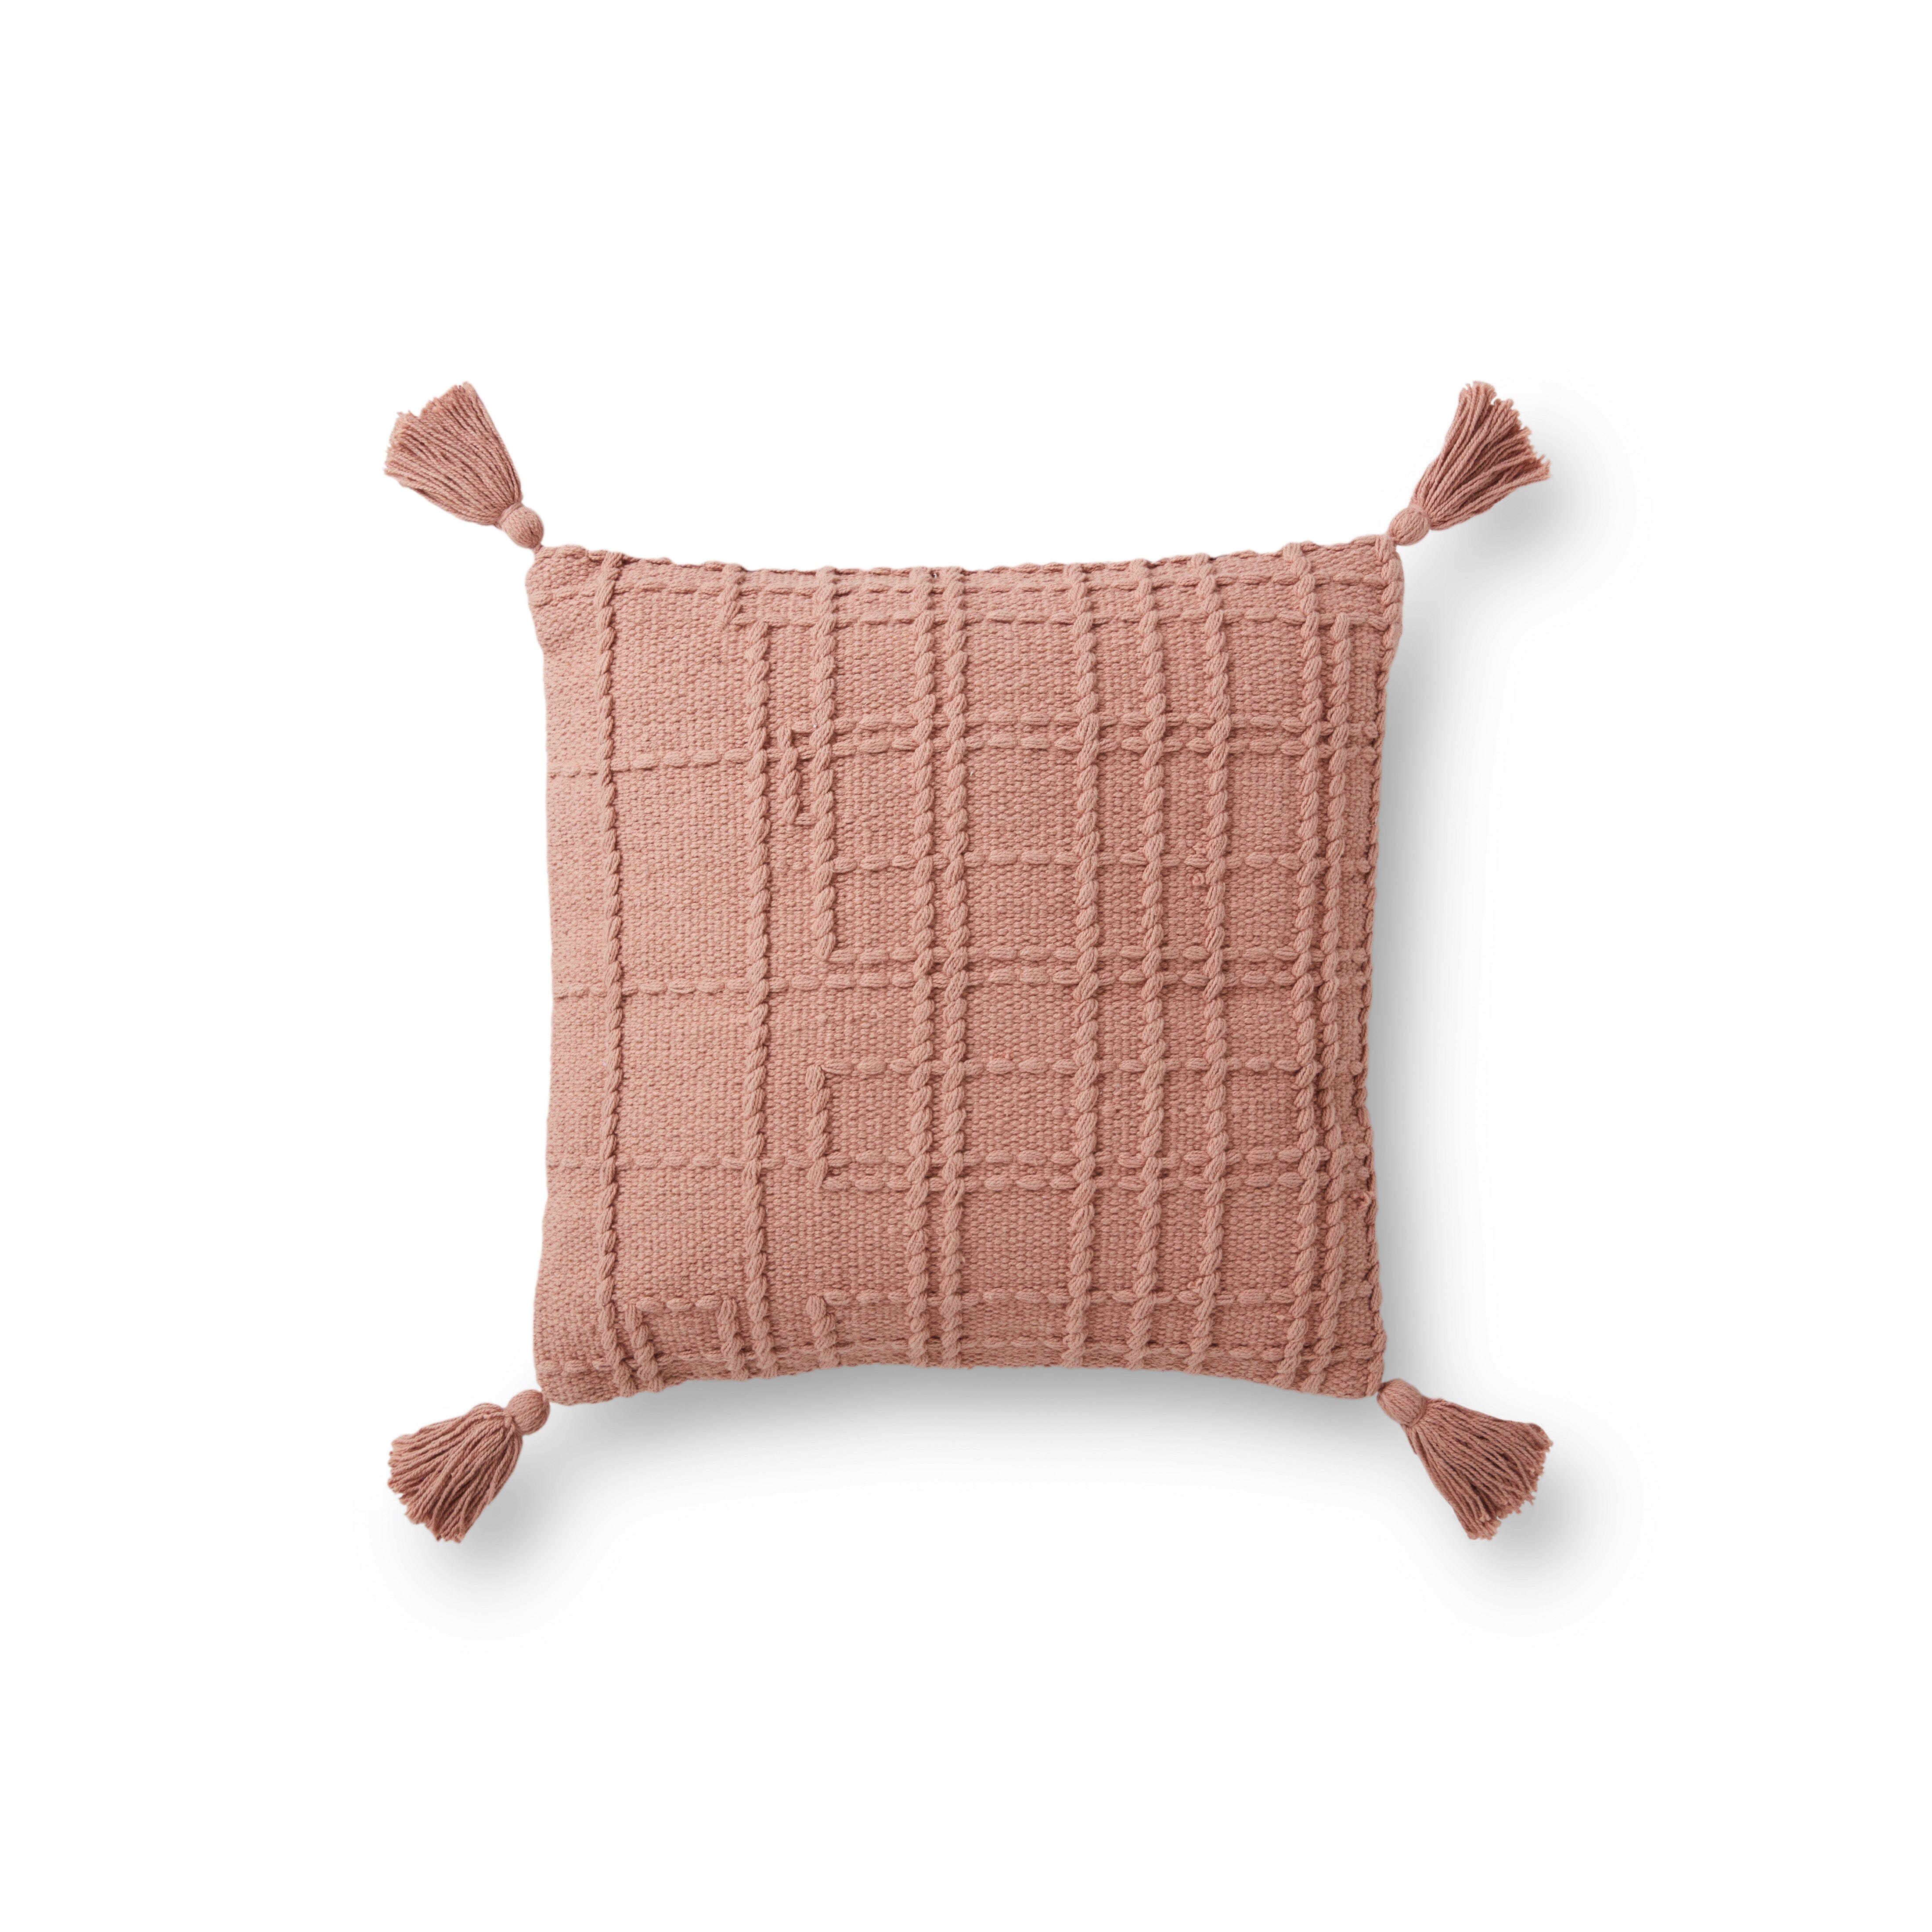 Magnolia Home by Joanna Gaines x Loloi Pillow | Rose PILLOW Magnolia Home by Joanna Gaines x Loloi